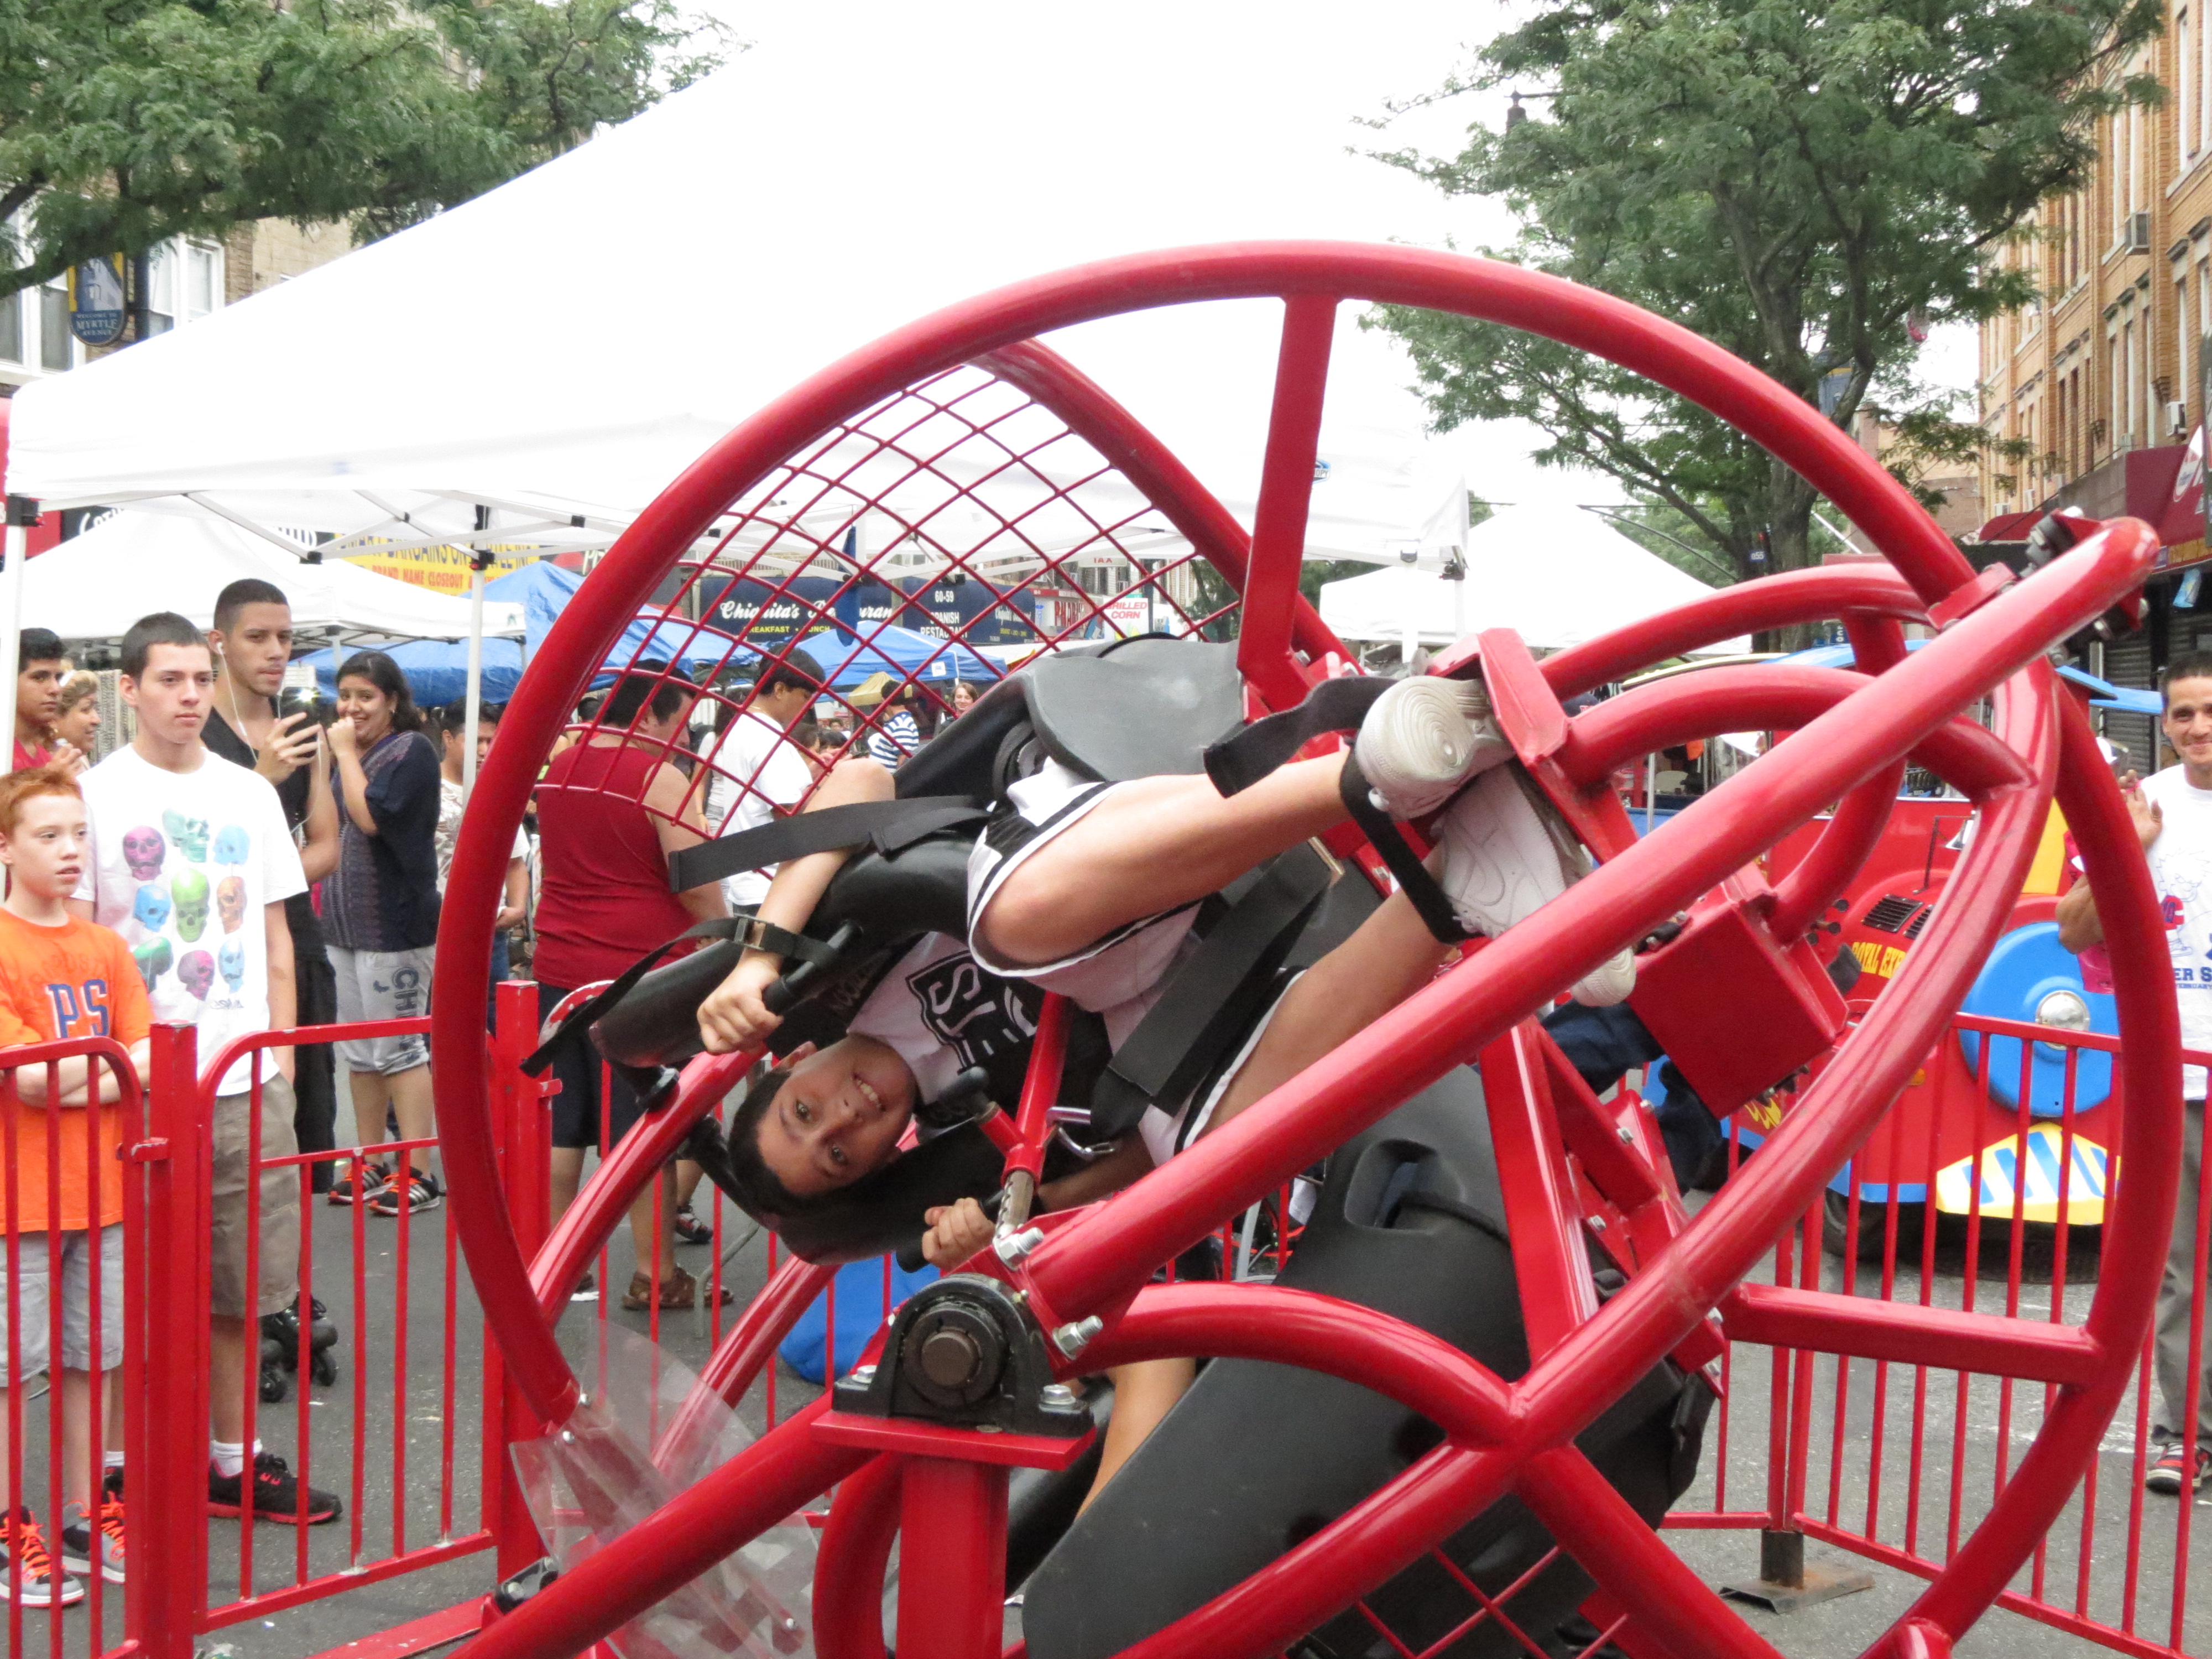 Festival goers braved a ride that spun them around and upside down.